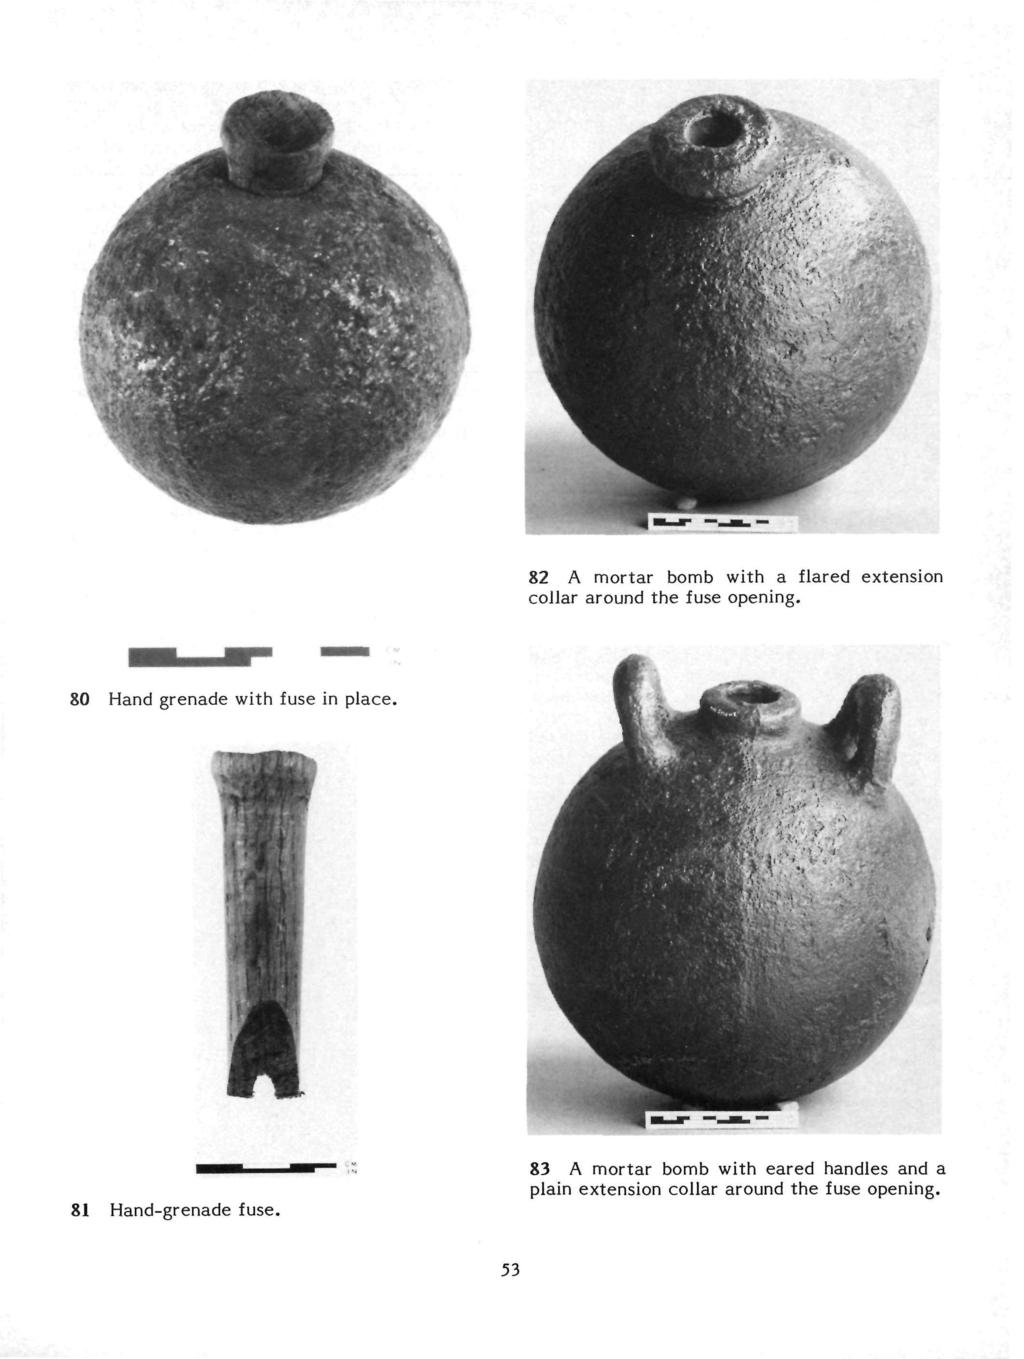 82 A mortar bomb with a flared extension collar around the fuse opening. 80 Hand grenade with fuse in place.